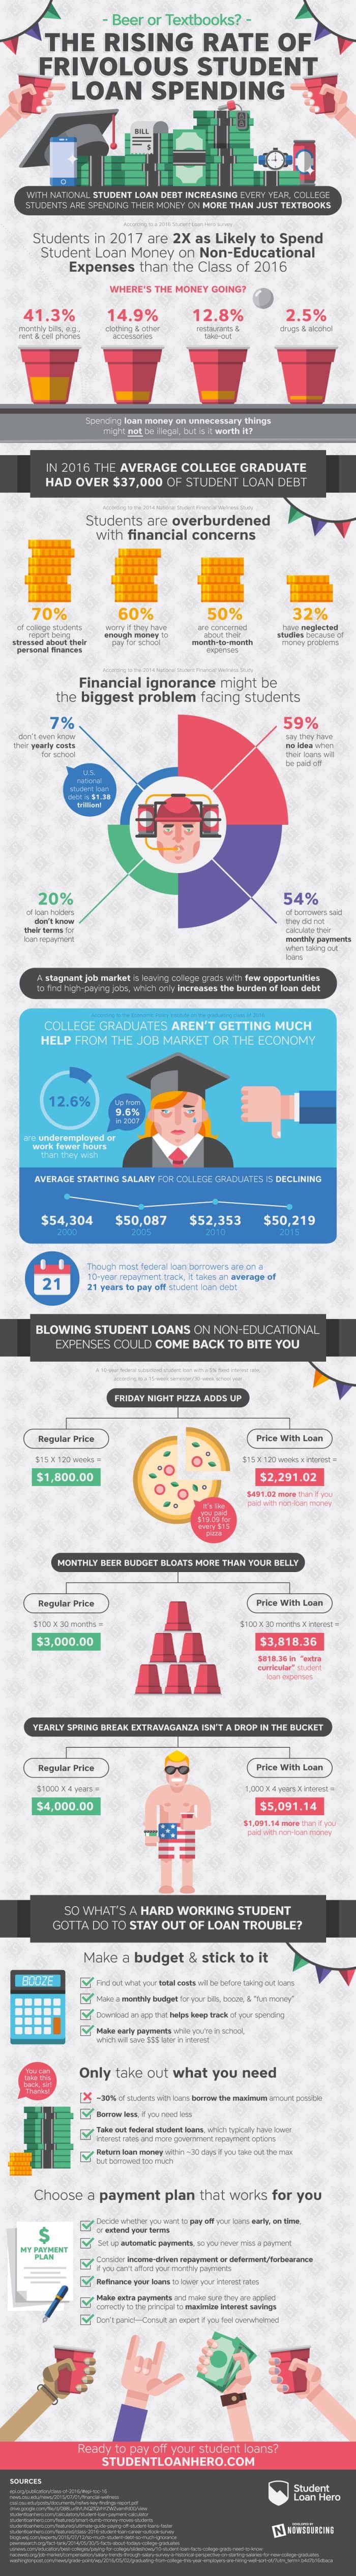 see-the-surprising-truth-about-how-students-are-spending-their-loans_58b7522094636_w1500